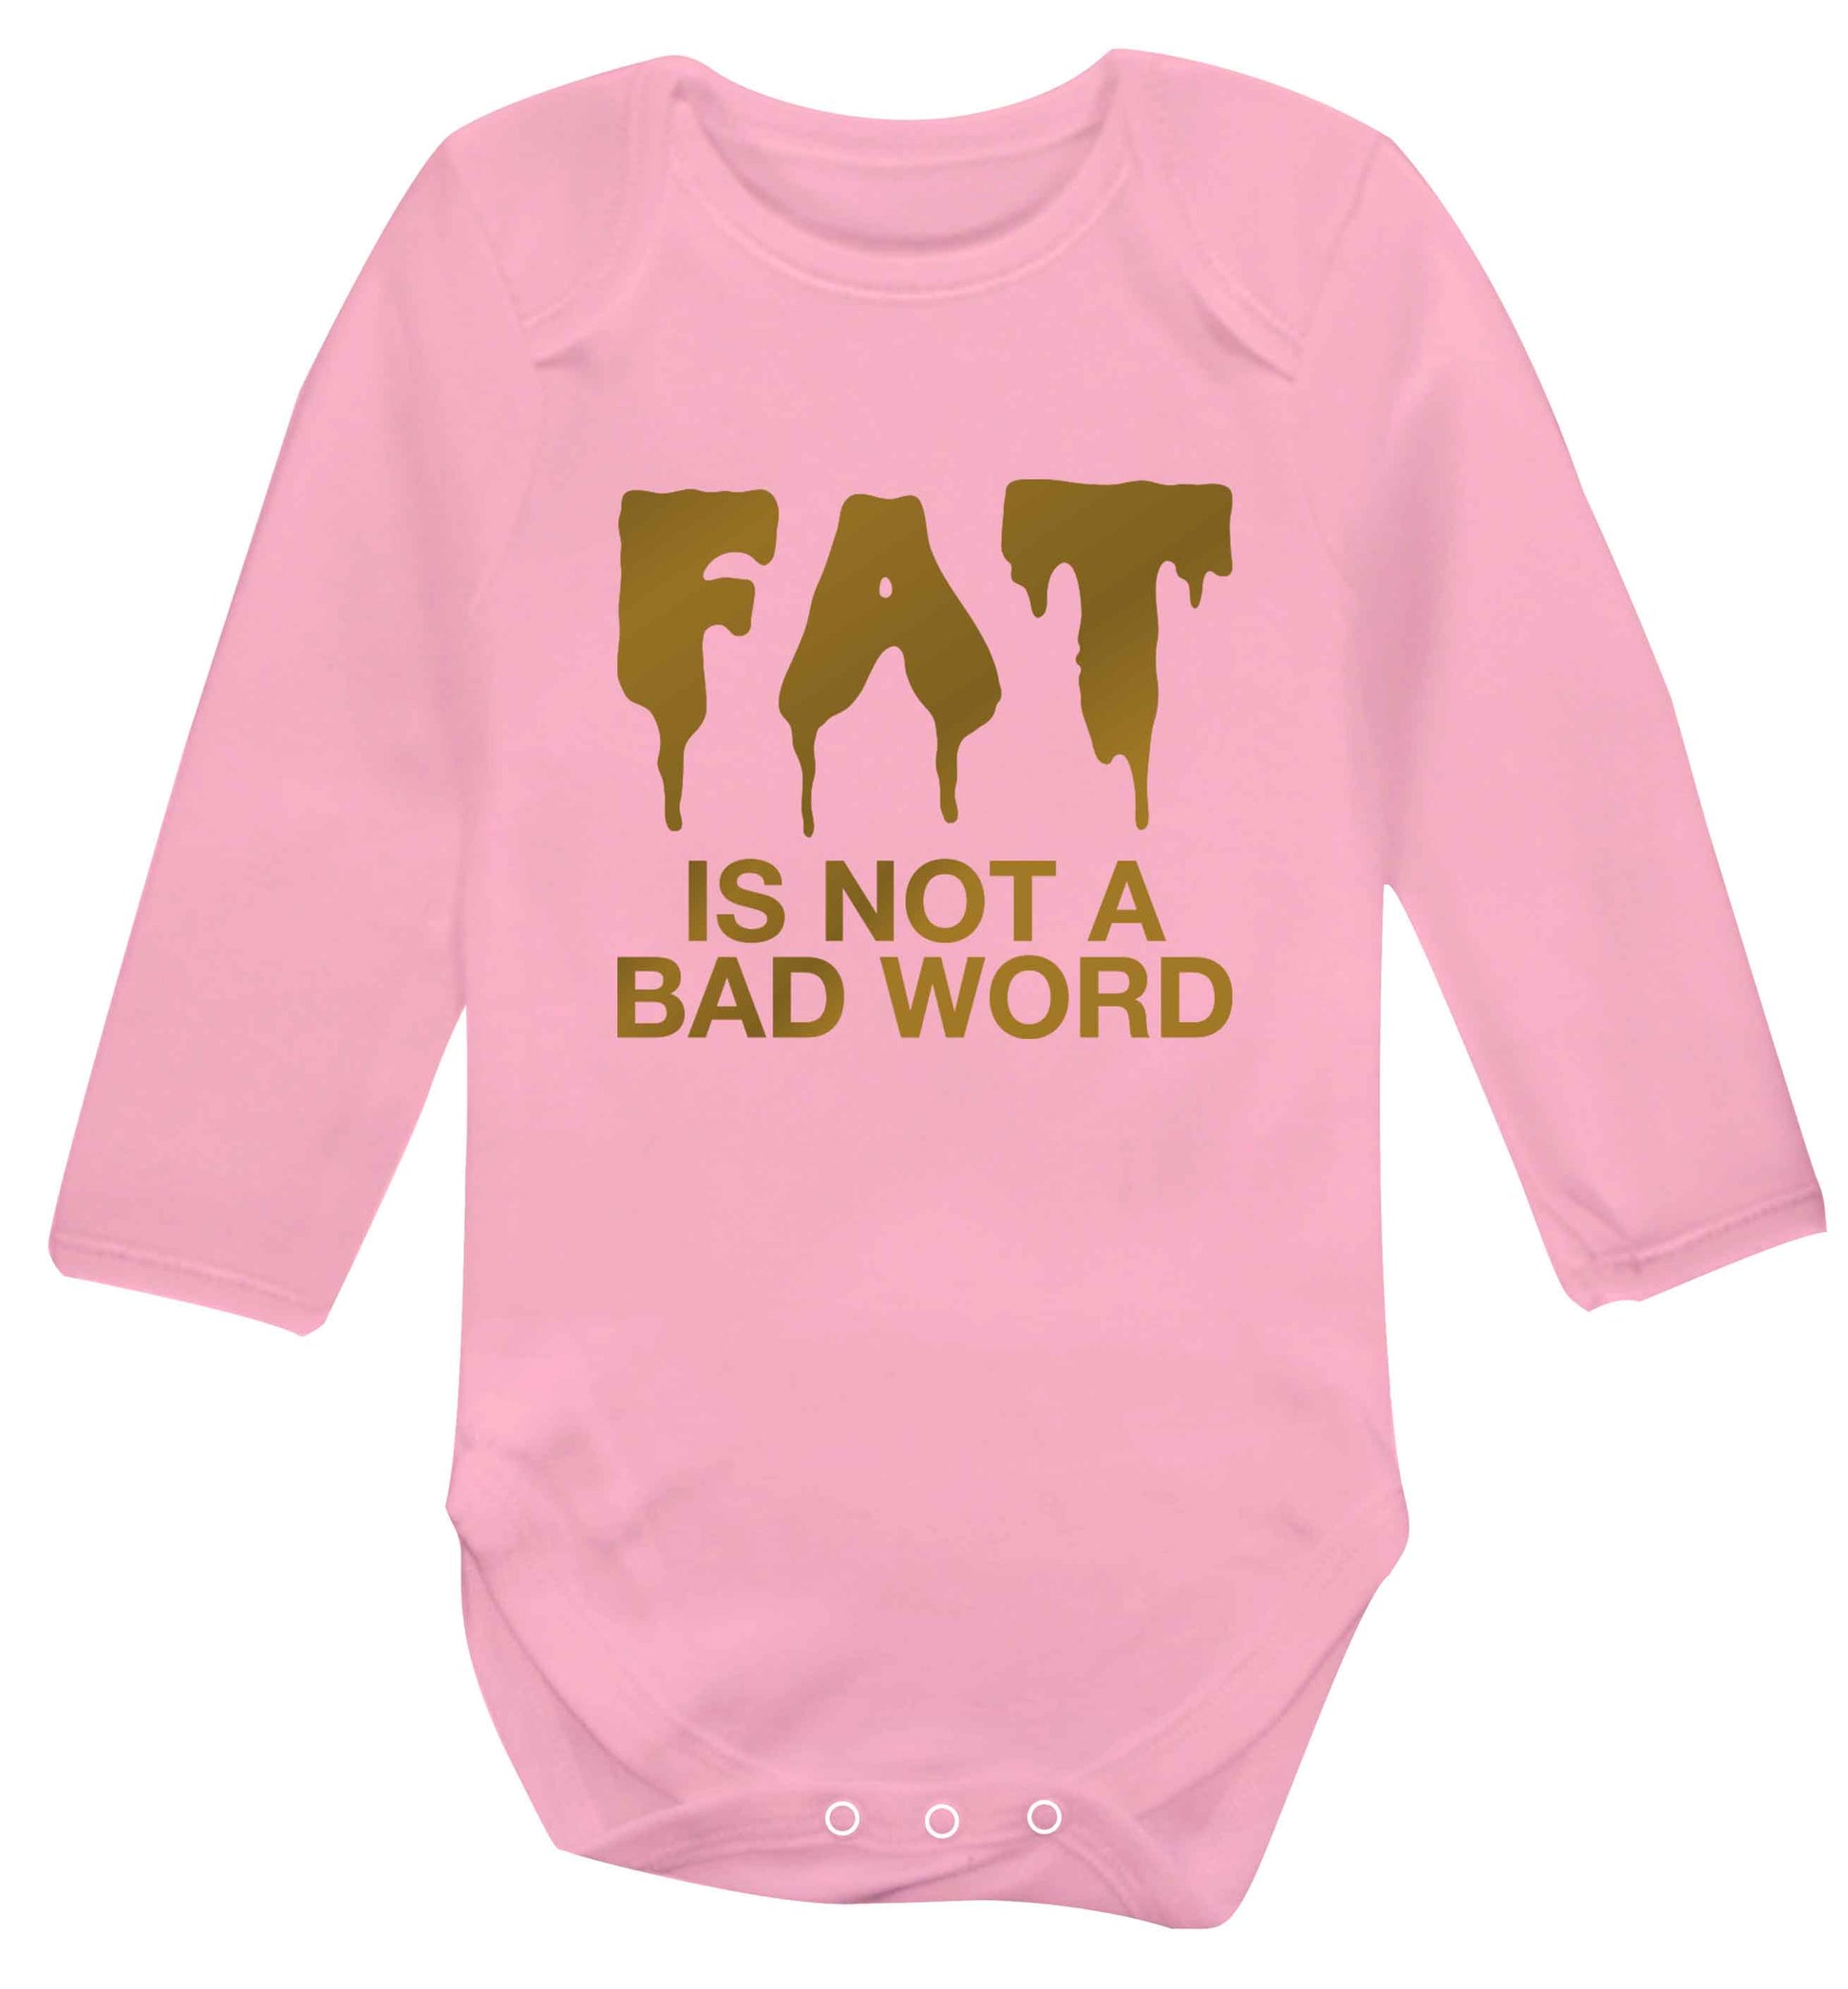 Fat is not a bad word baby vest long sleeved pale pink 6-12 months